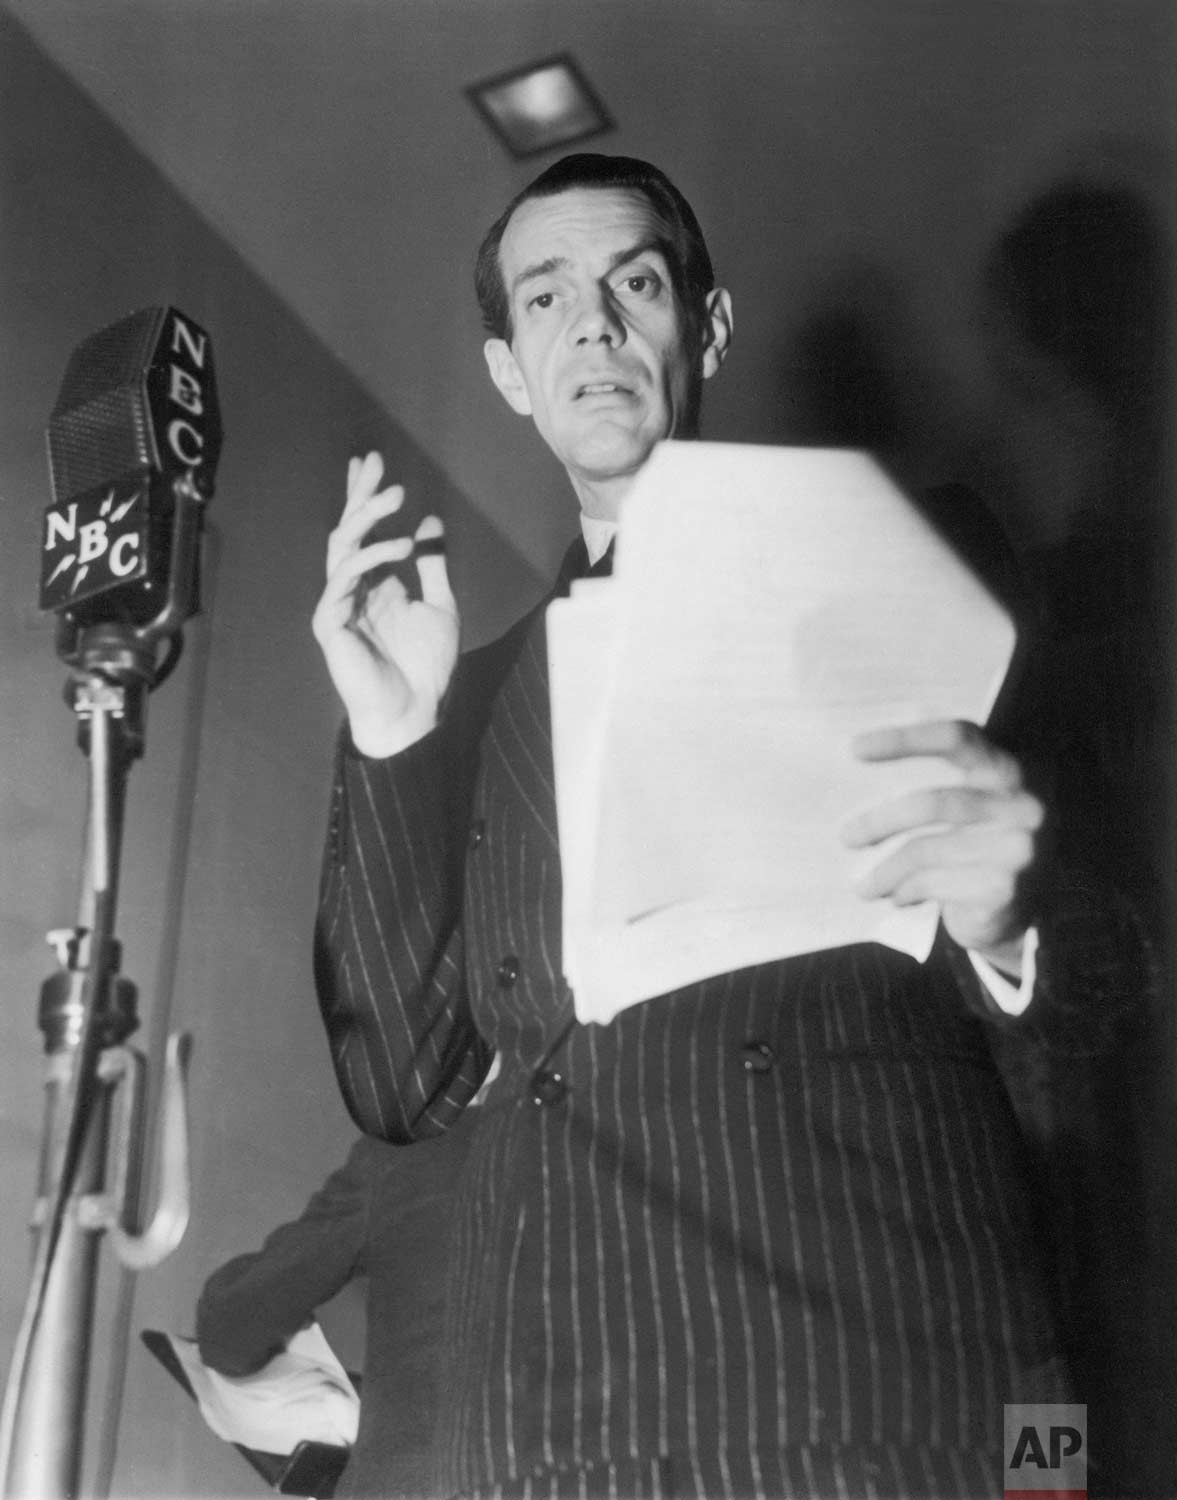  Actor Raymond Massey performs as Abraham Lincoln for the radio play, "Ninety Years of News", a dramatization by the National Broadcasting Company (NBC), celebrating what was then believed to be AP's 90th anniversary, December 25, 1938 in New York. (